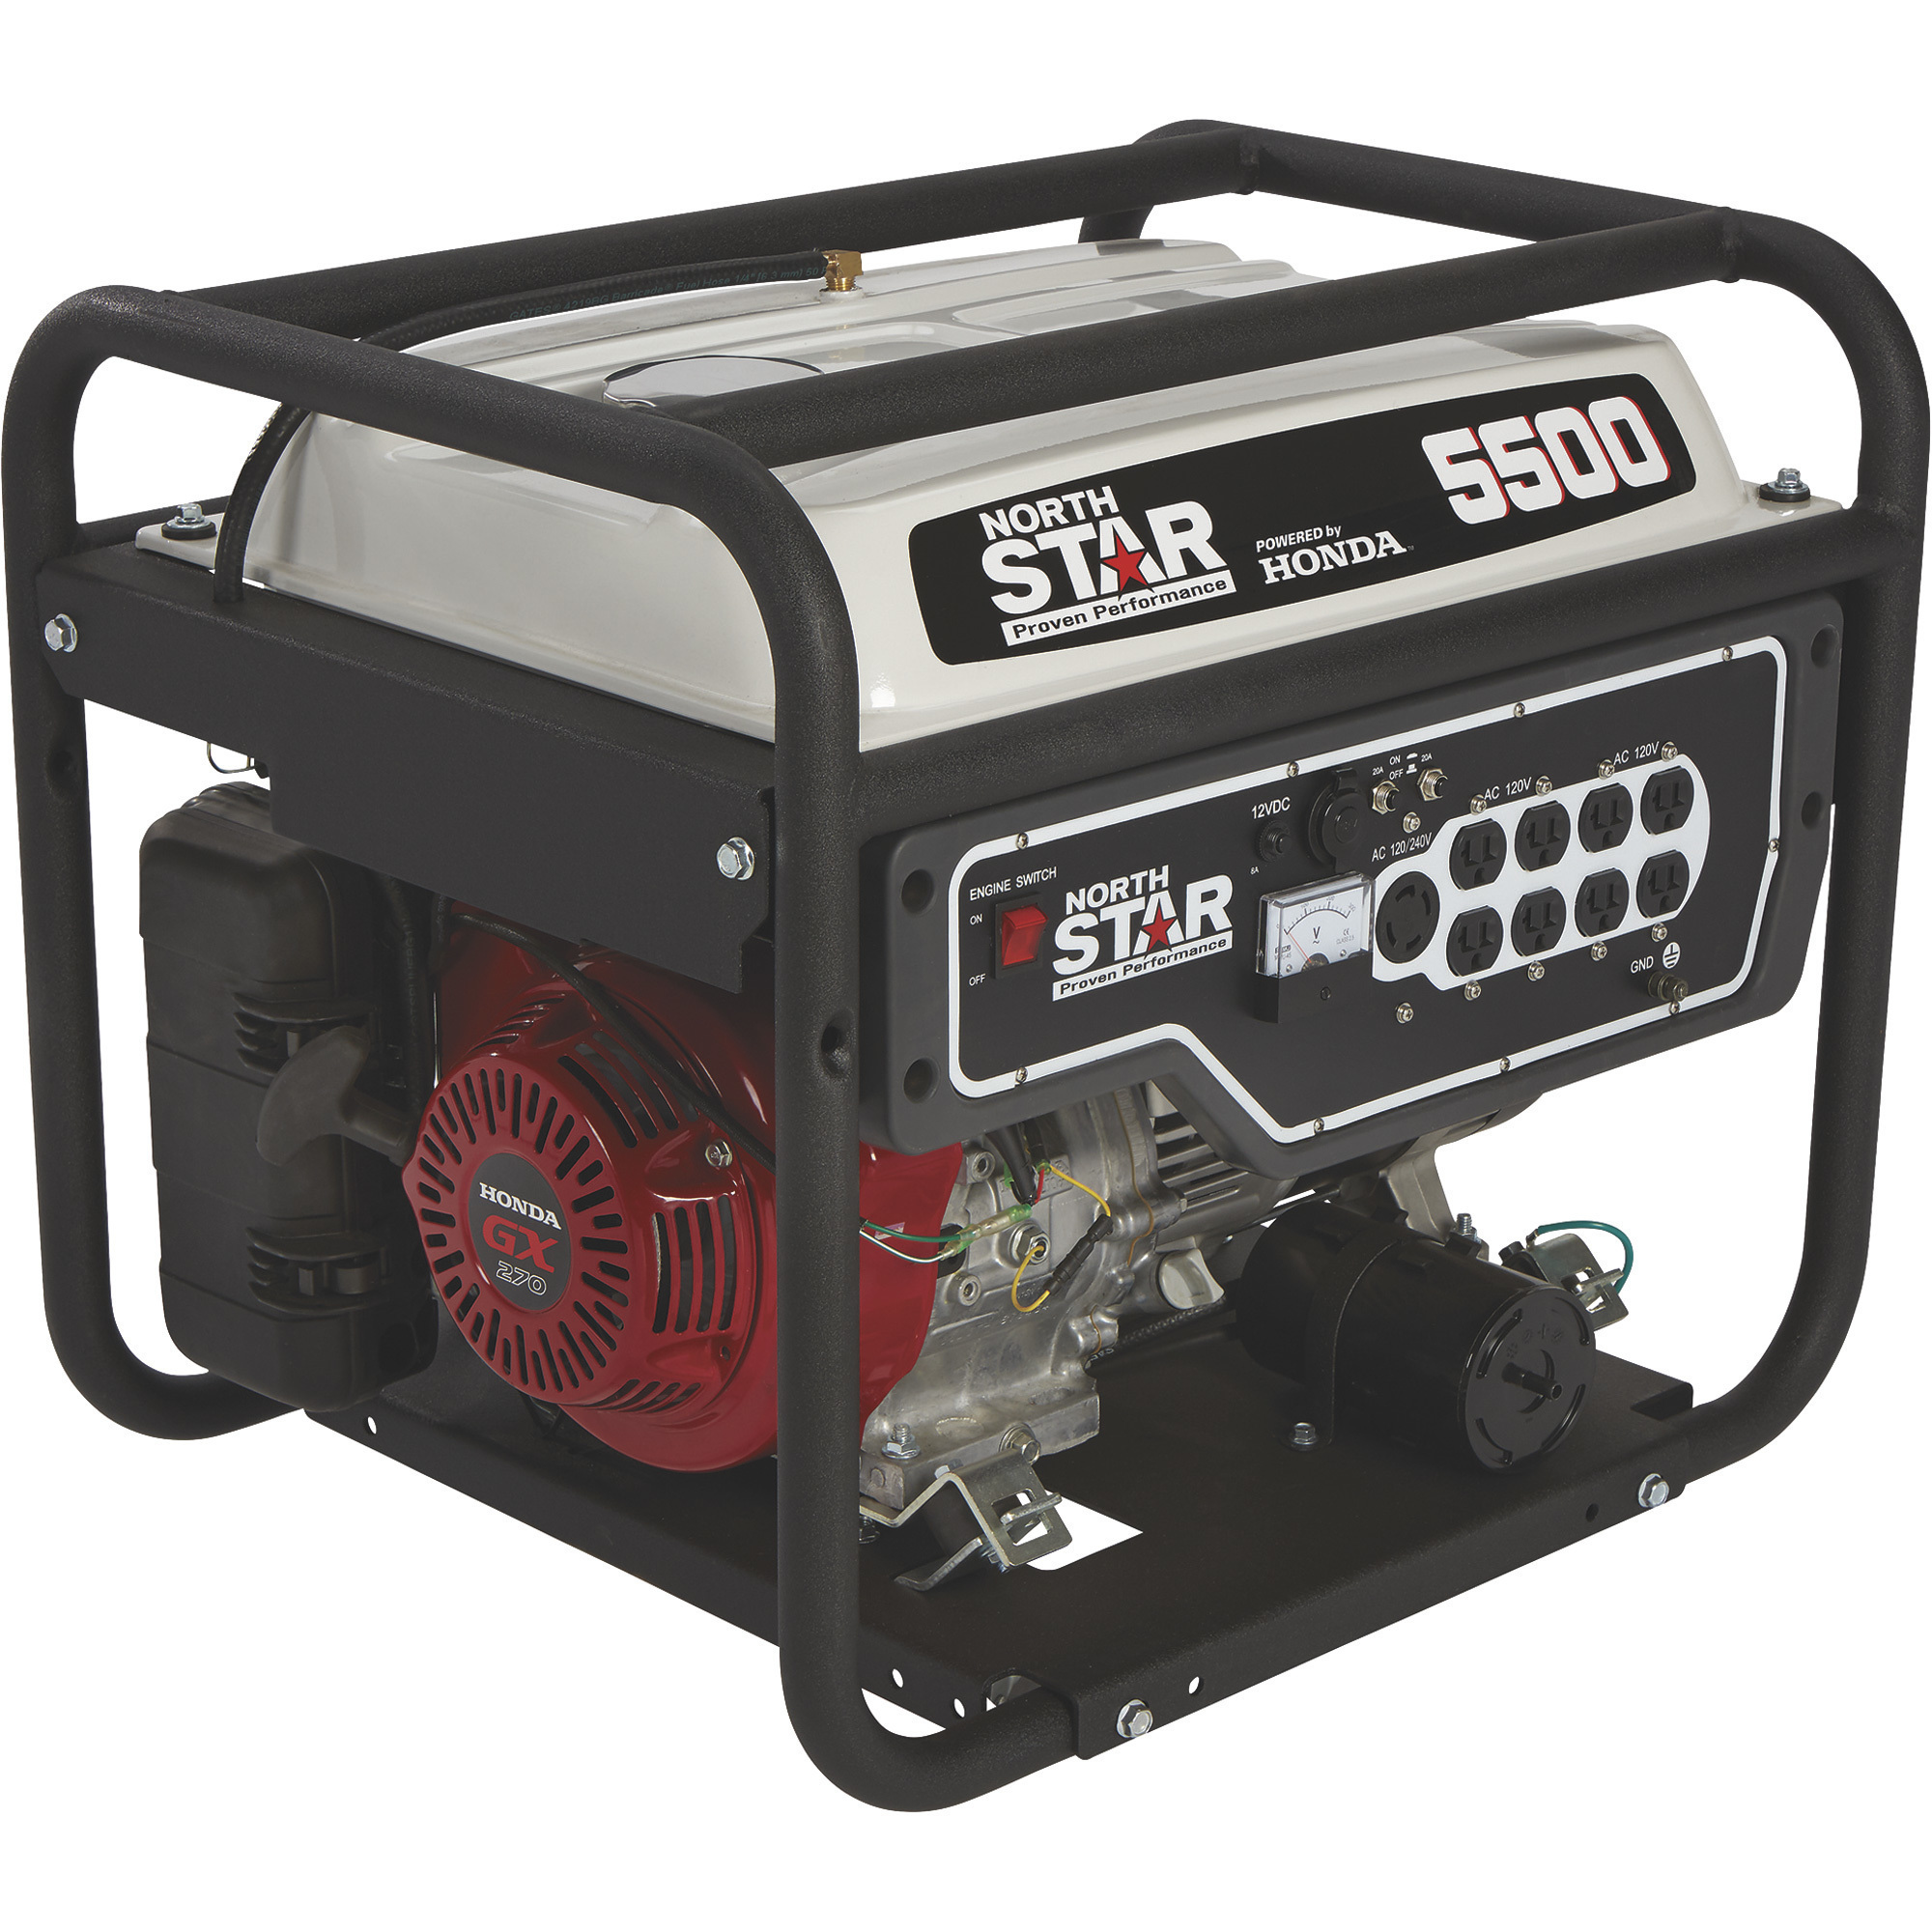 NorthStar Portable Generator with Honda GX270 Engine, 5500 Surge Watts, 4500 Rated Watts, CARB Compliant